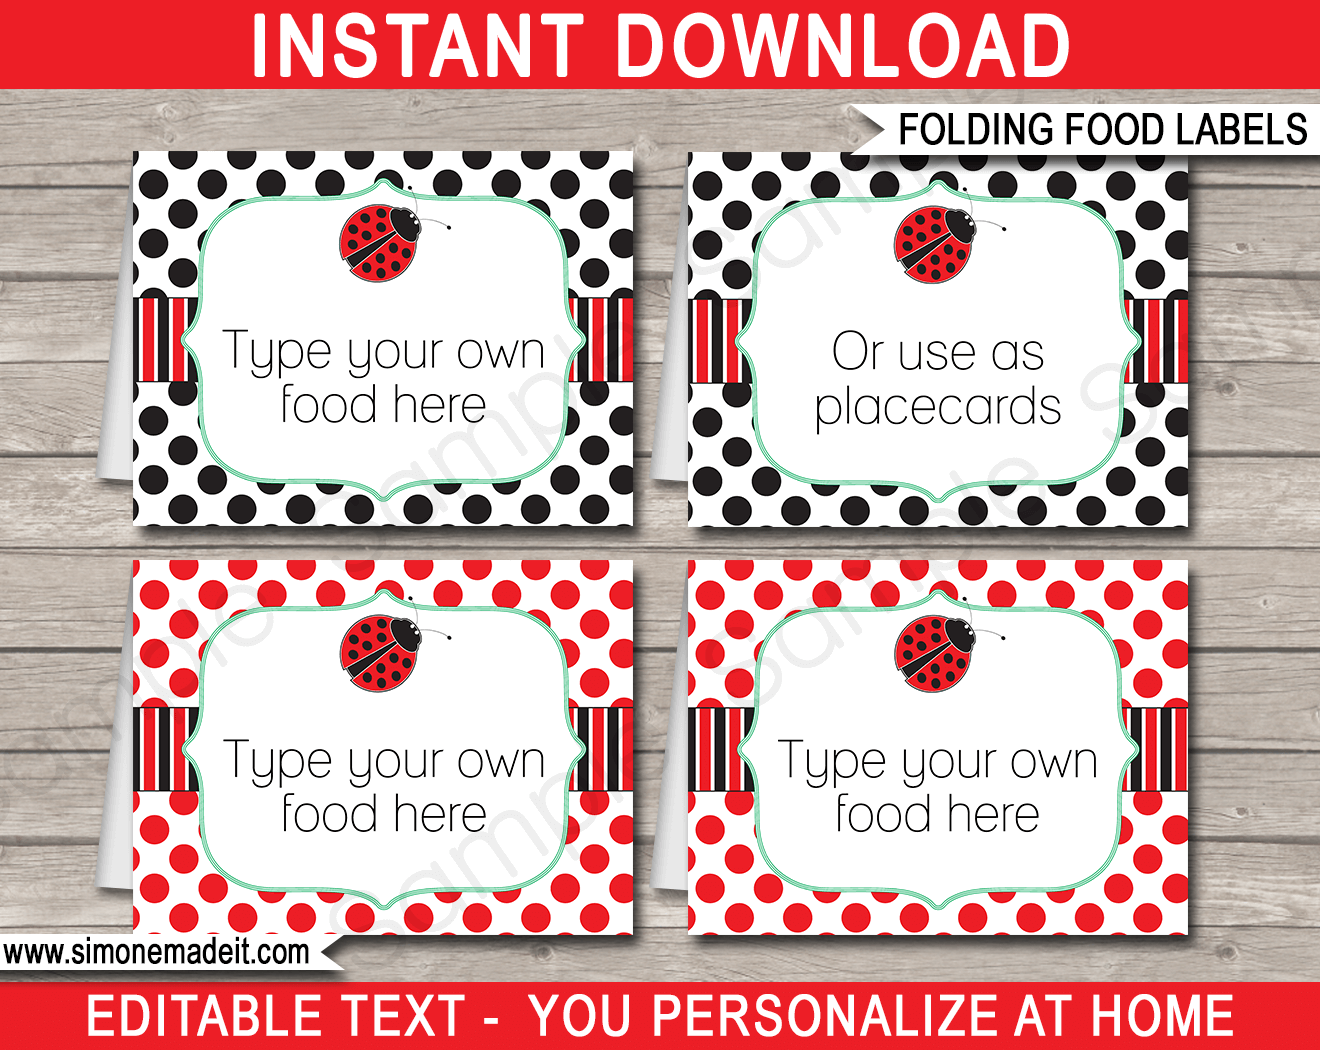 Printable Ladybug Party Food Labels | Food Buffet Tags | Tent Cards | Place Cards | Ladybird or Ladybug Theme Birthday Party Decorations | DIY Editable Template | Instant Download via simonemadeit.com